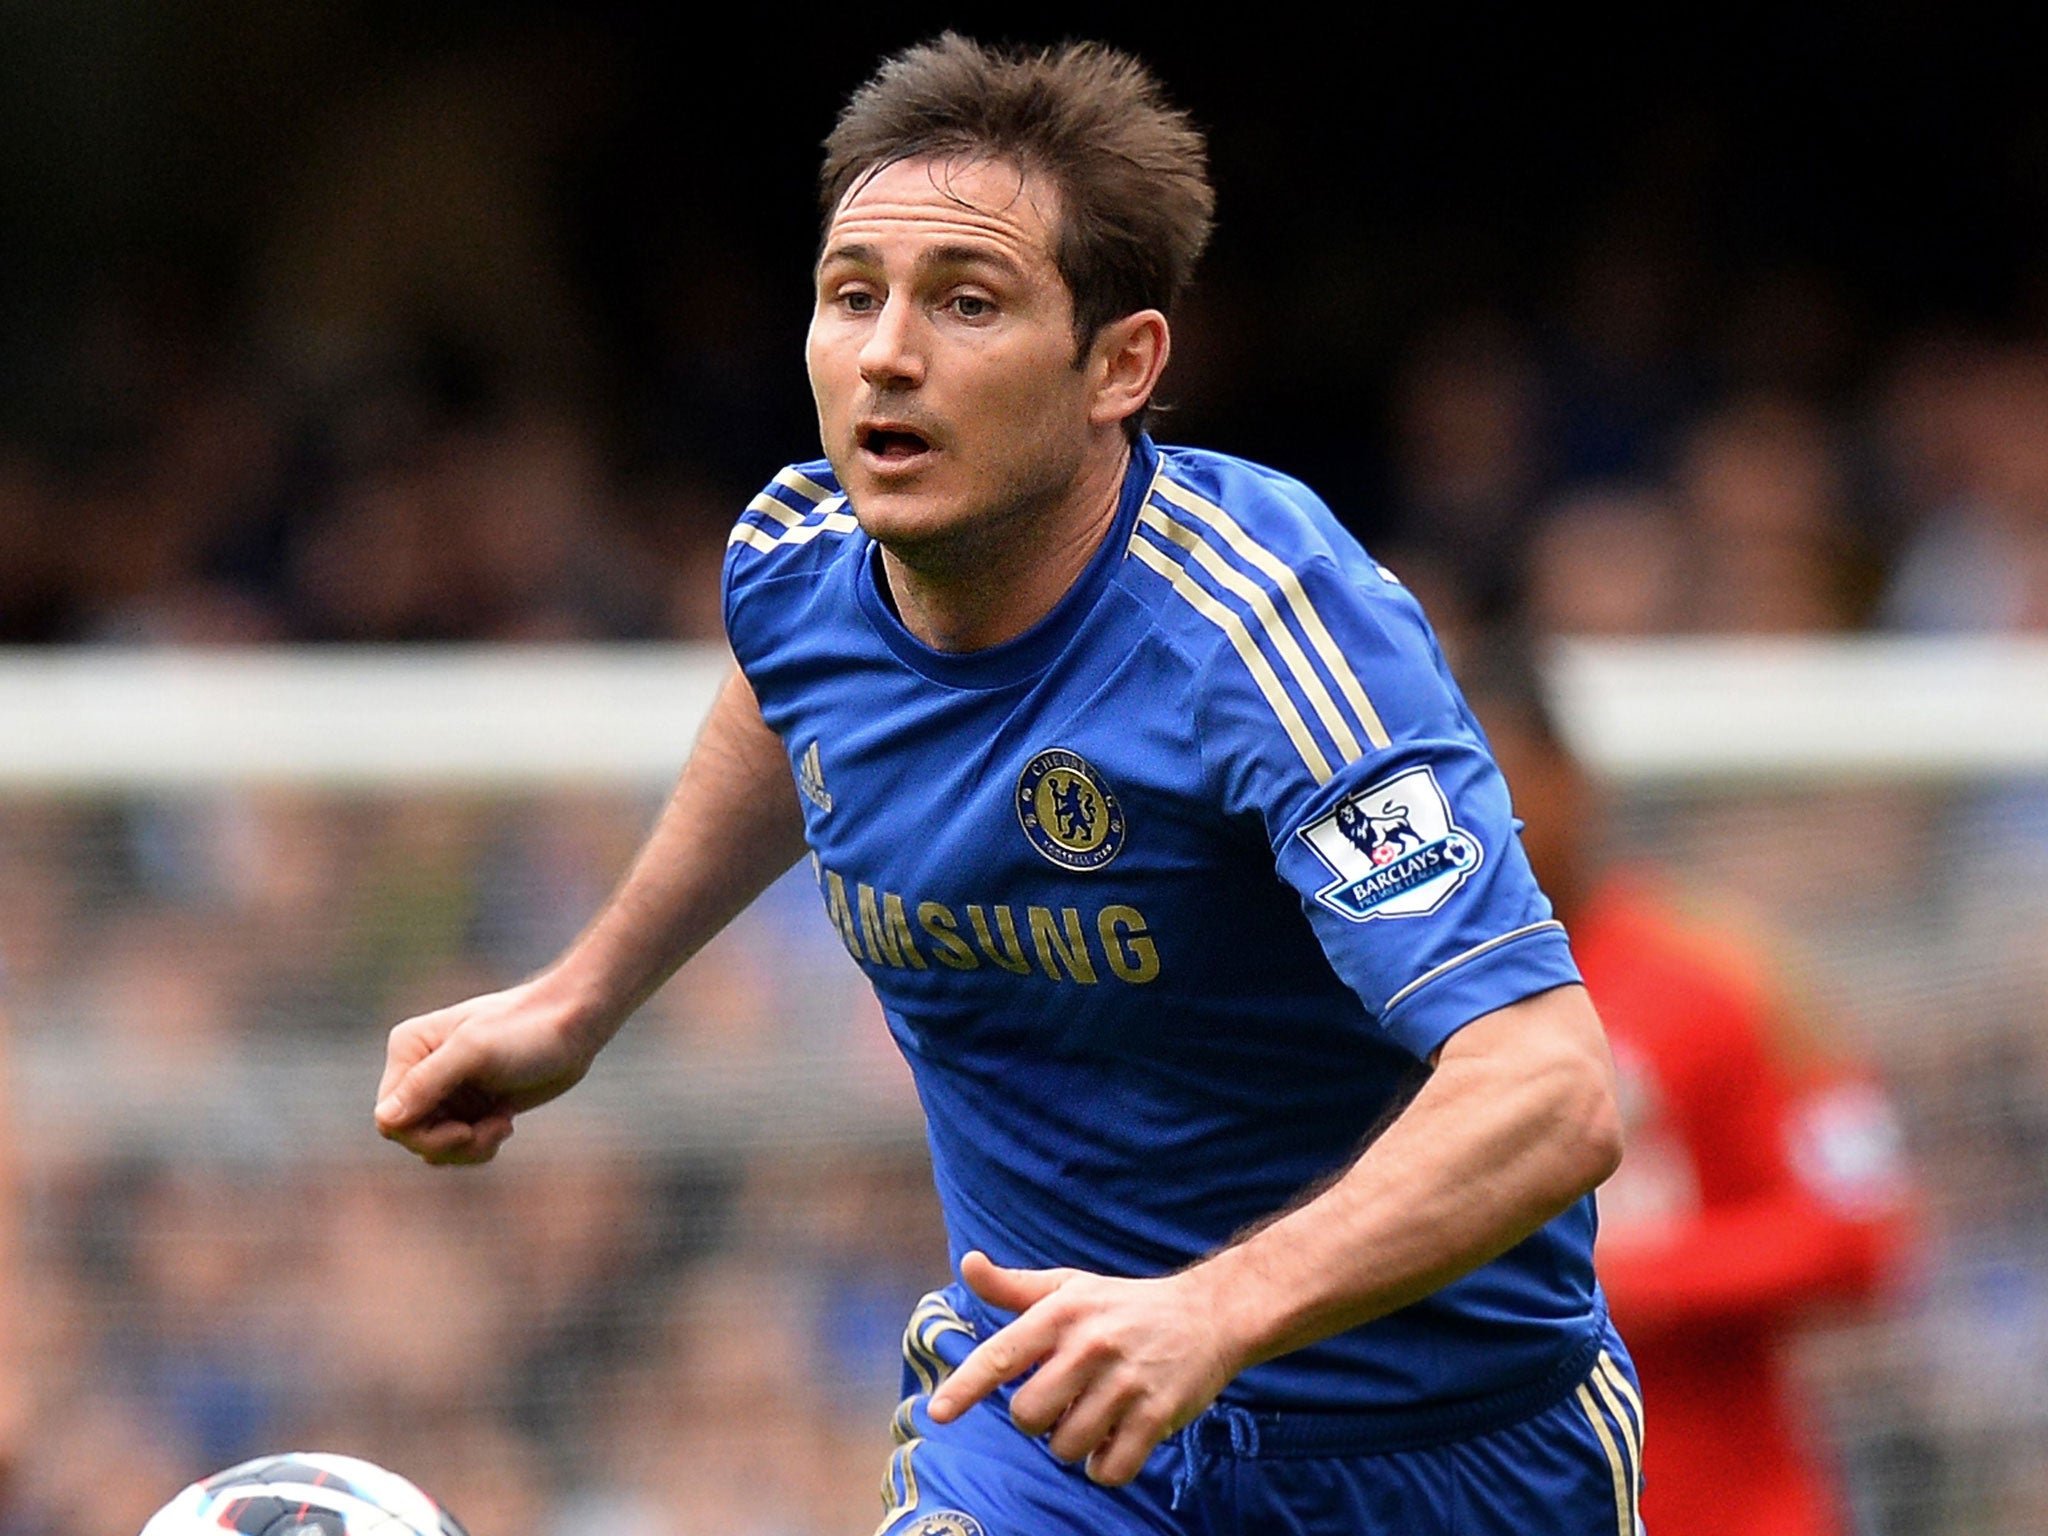 Frank Lampard said that the return of Jose Mourinho would transform Chelsea again